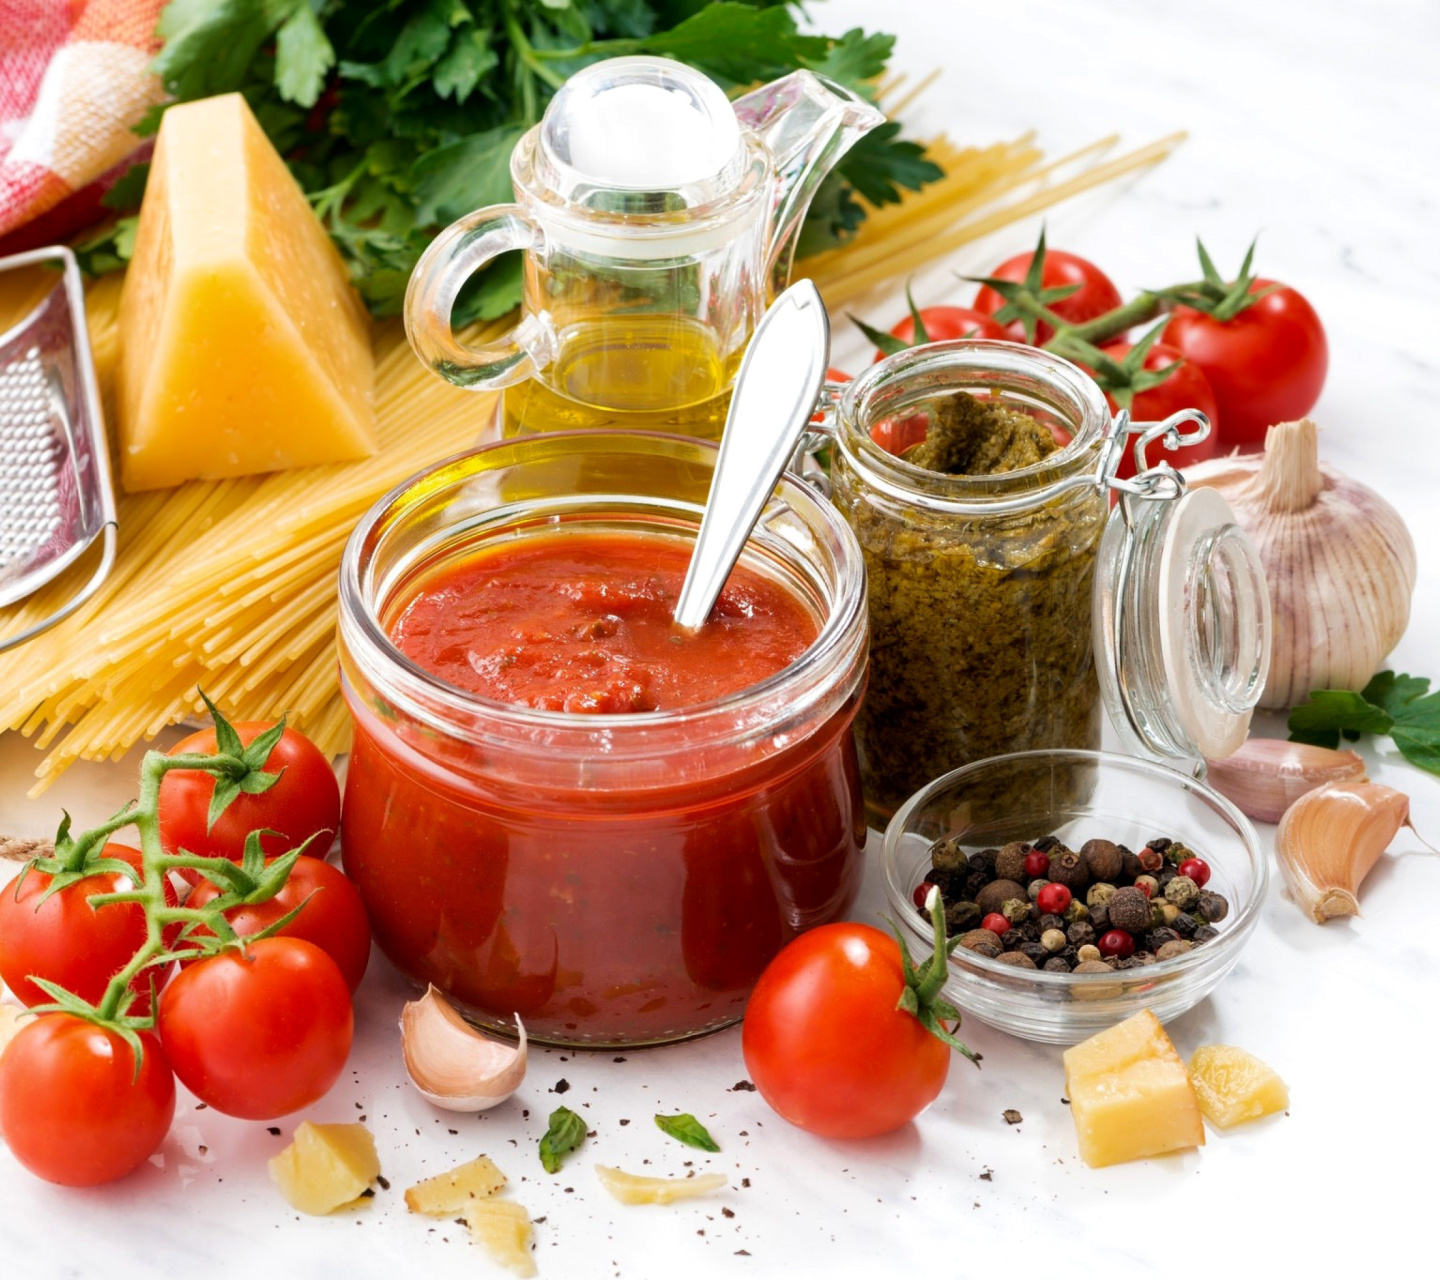 Das Lecho with tomatoes, spices and cheese Wallpaper 1440x1280